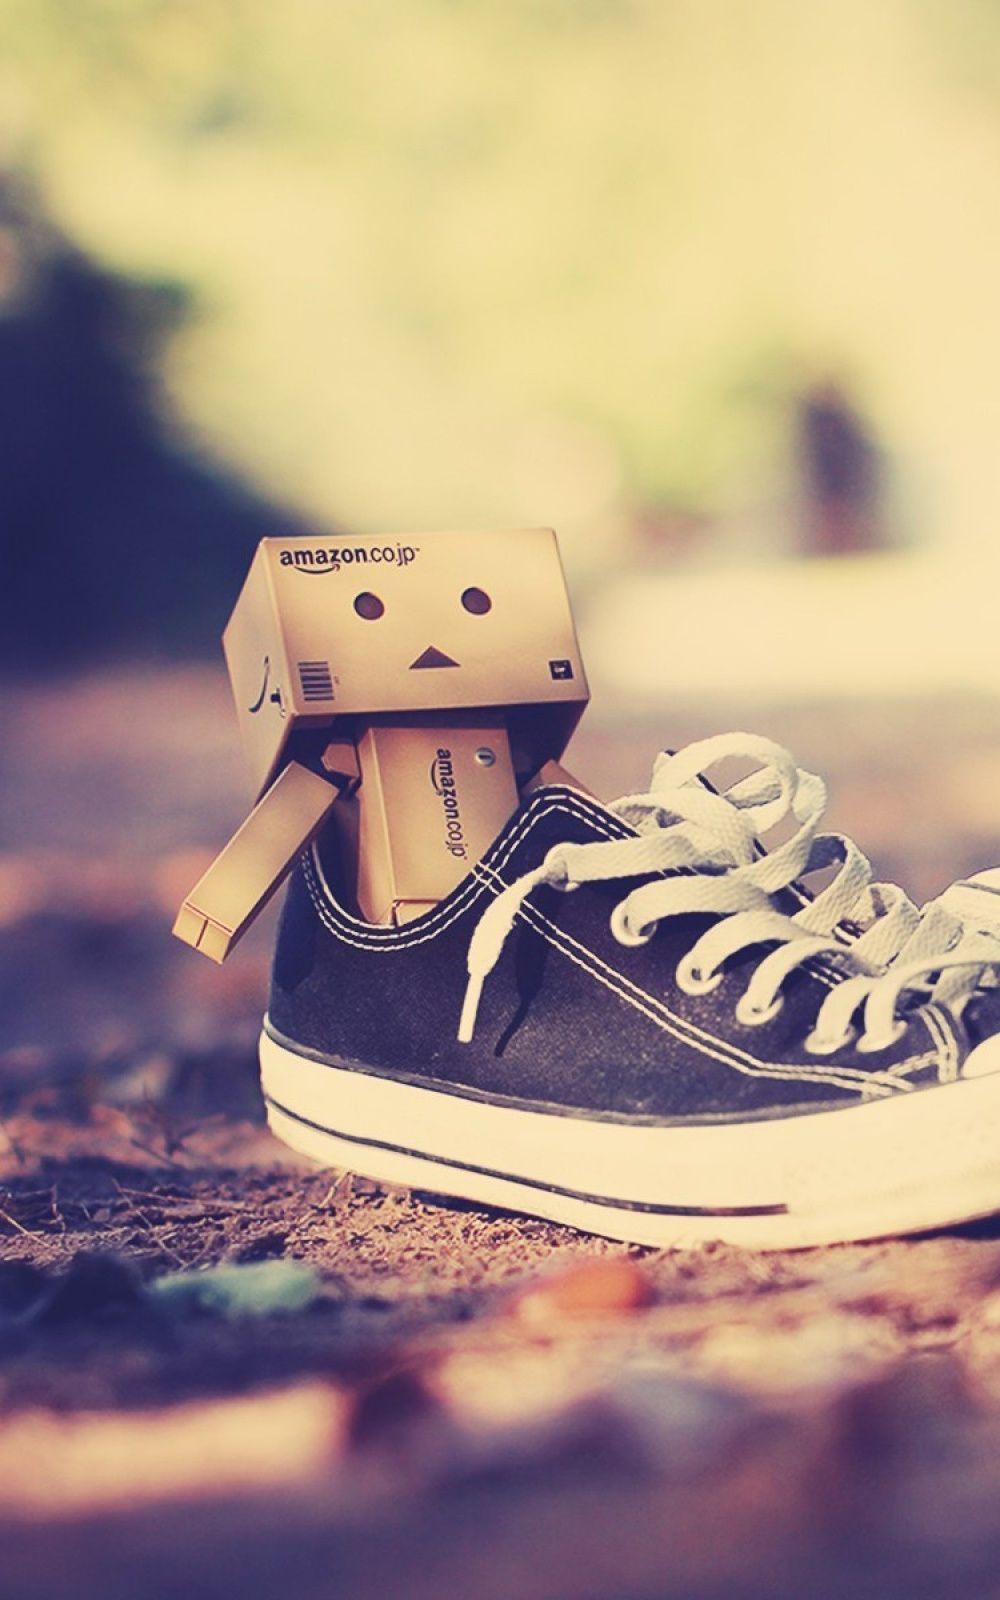 Converse Wallpaper For iPhone